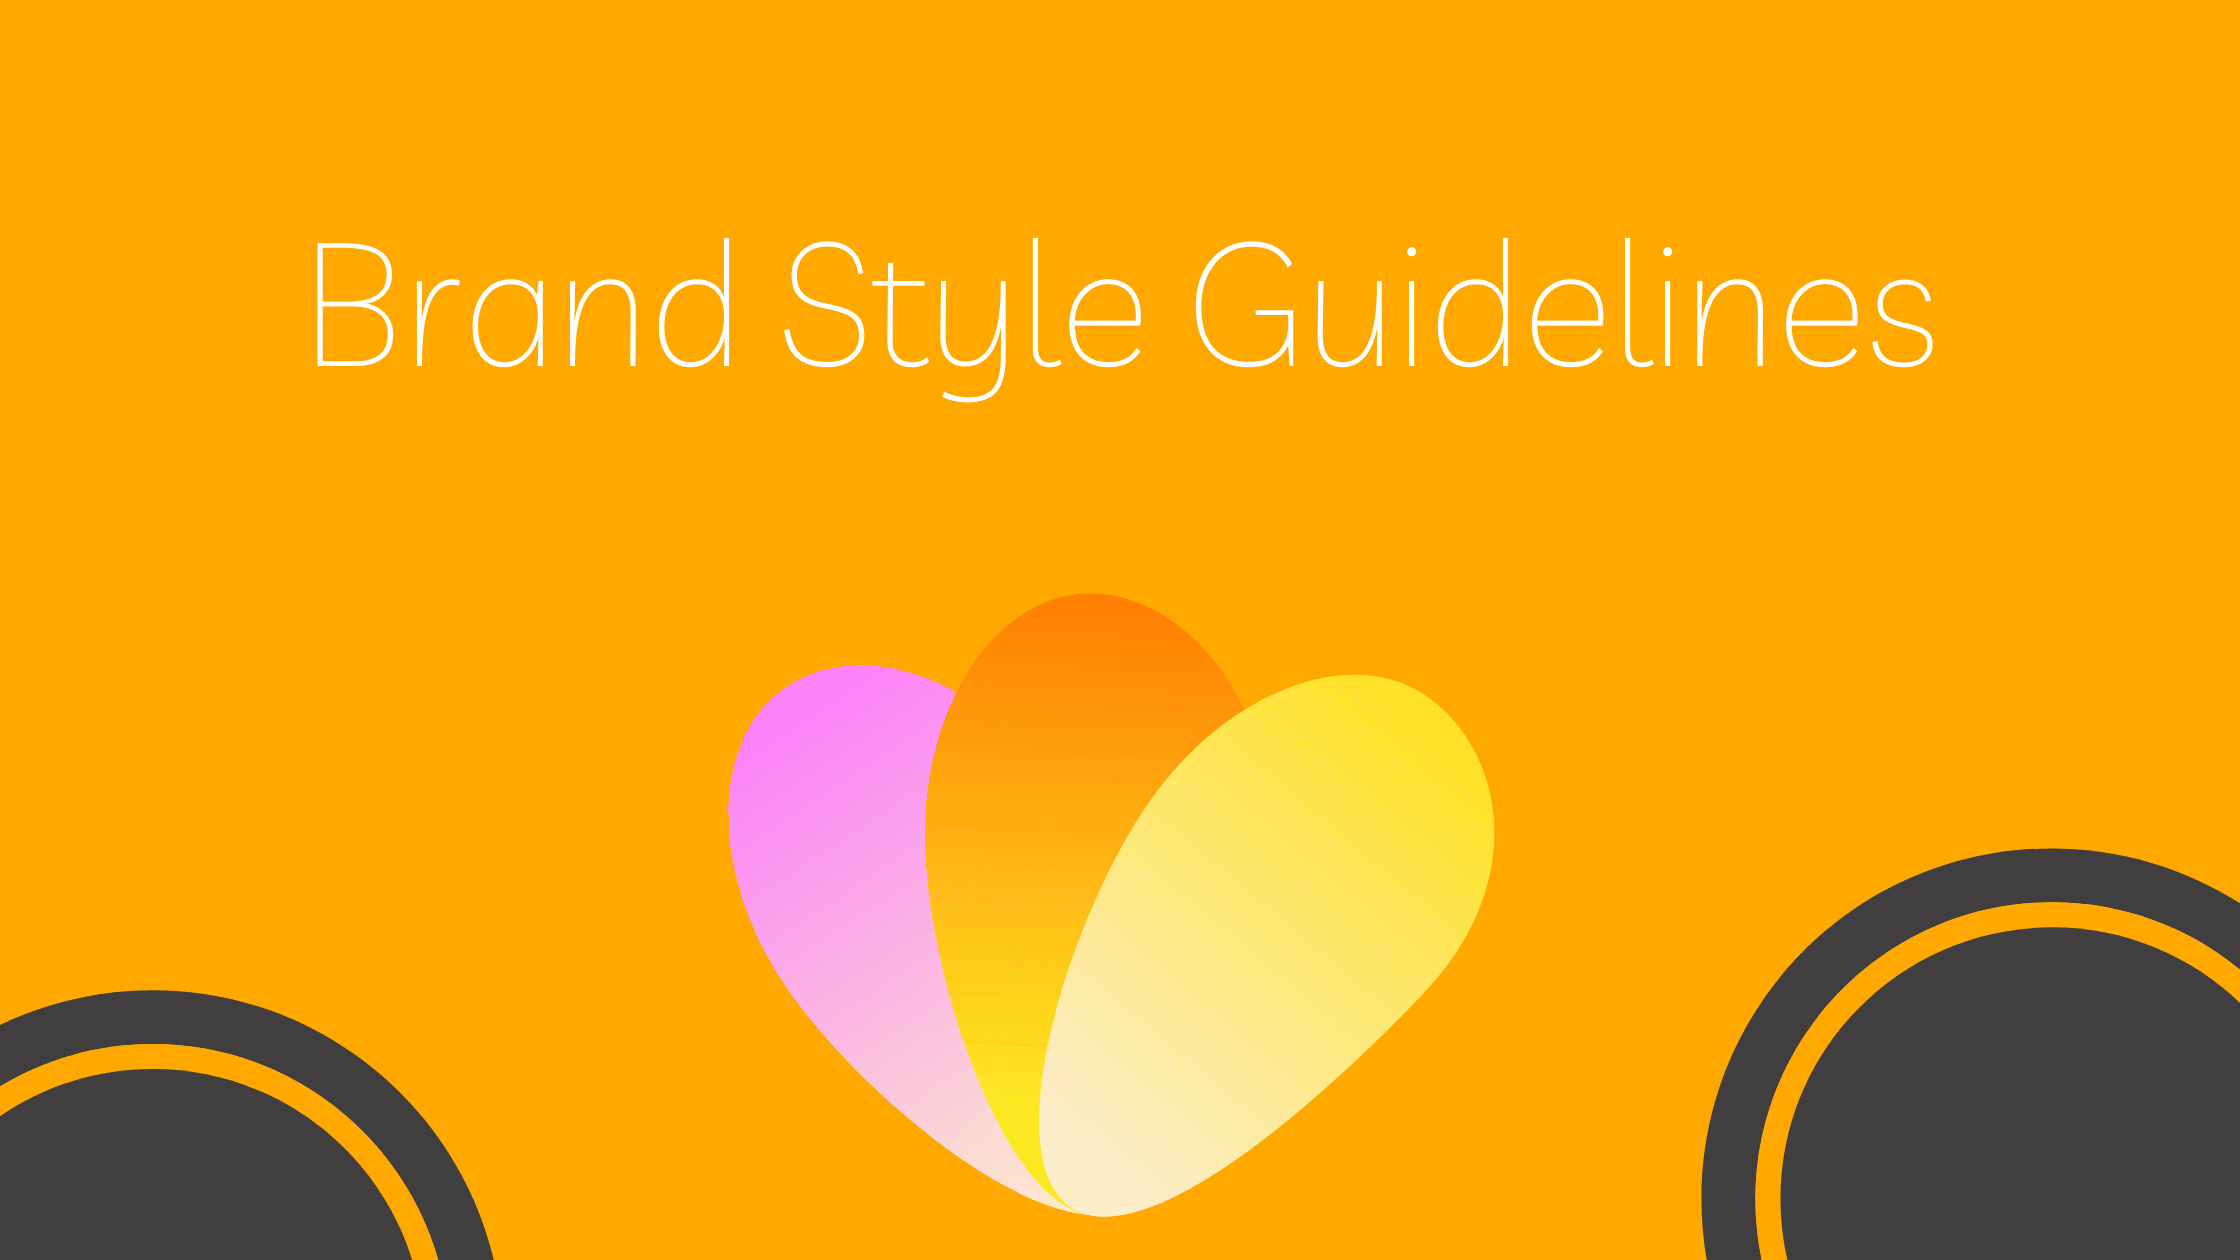 Brand Style Guidelines and content creation